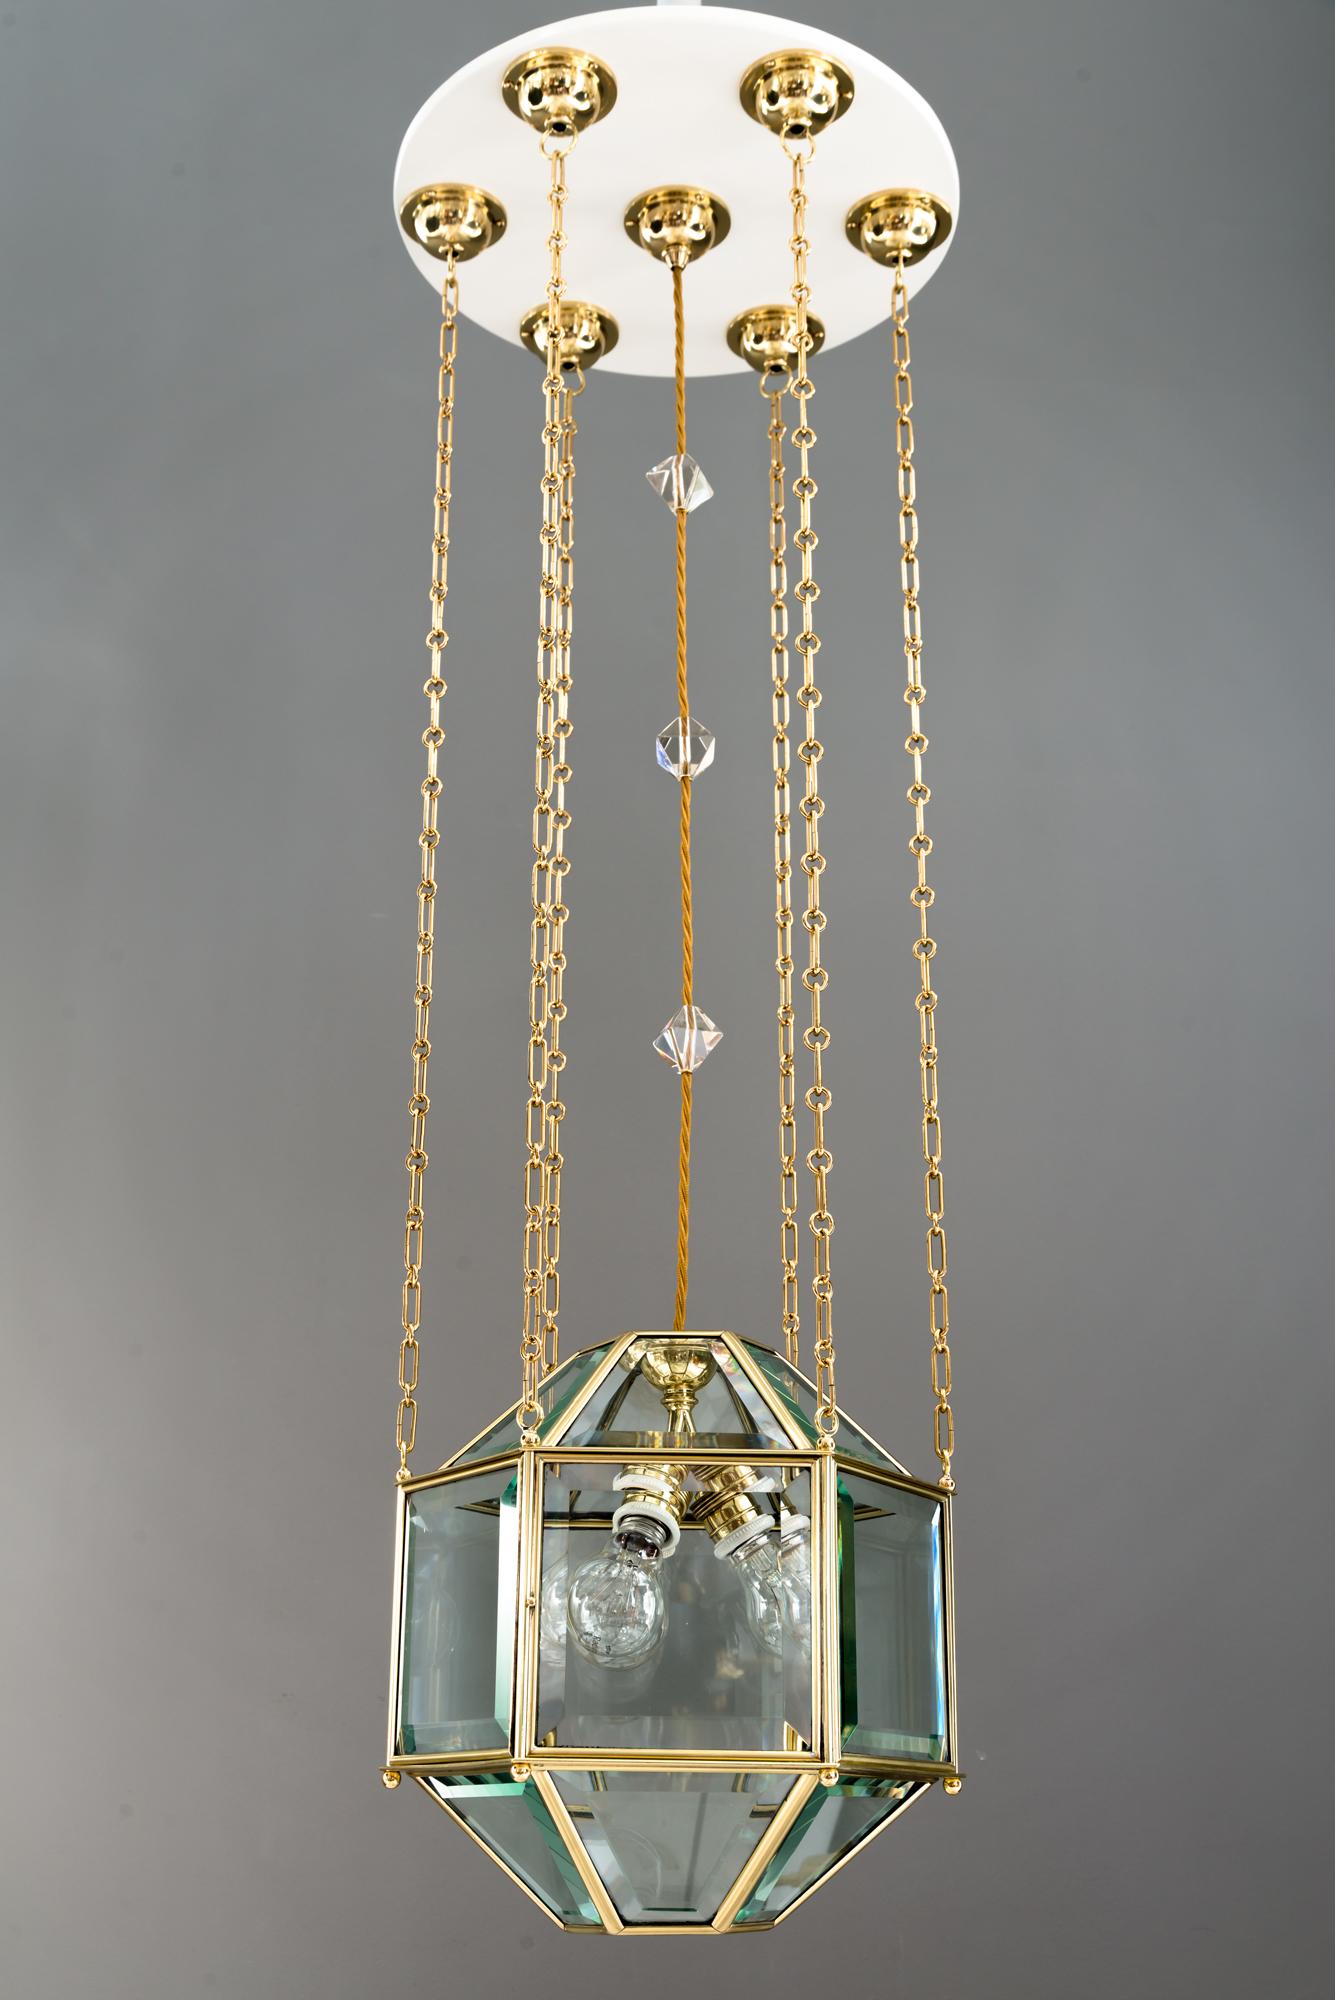 Amazing and big chandelier with original cut glasses, Vienna, circa 1910s
Brass polished and stove enameled
3 bulbs inside
One side has a door who can be opened for bulbs changing.
The height can be relatively 